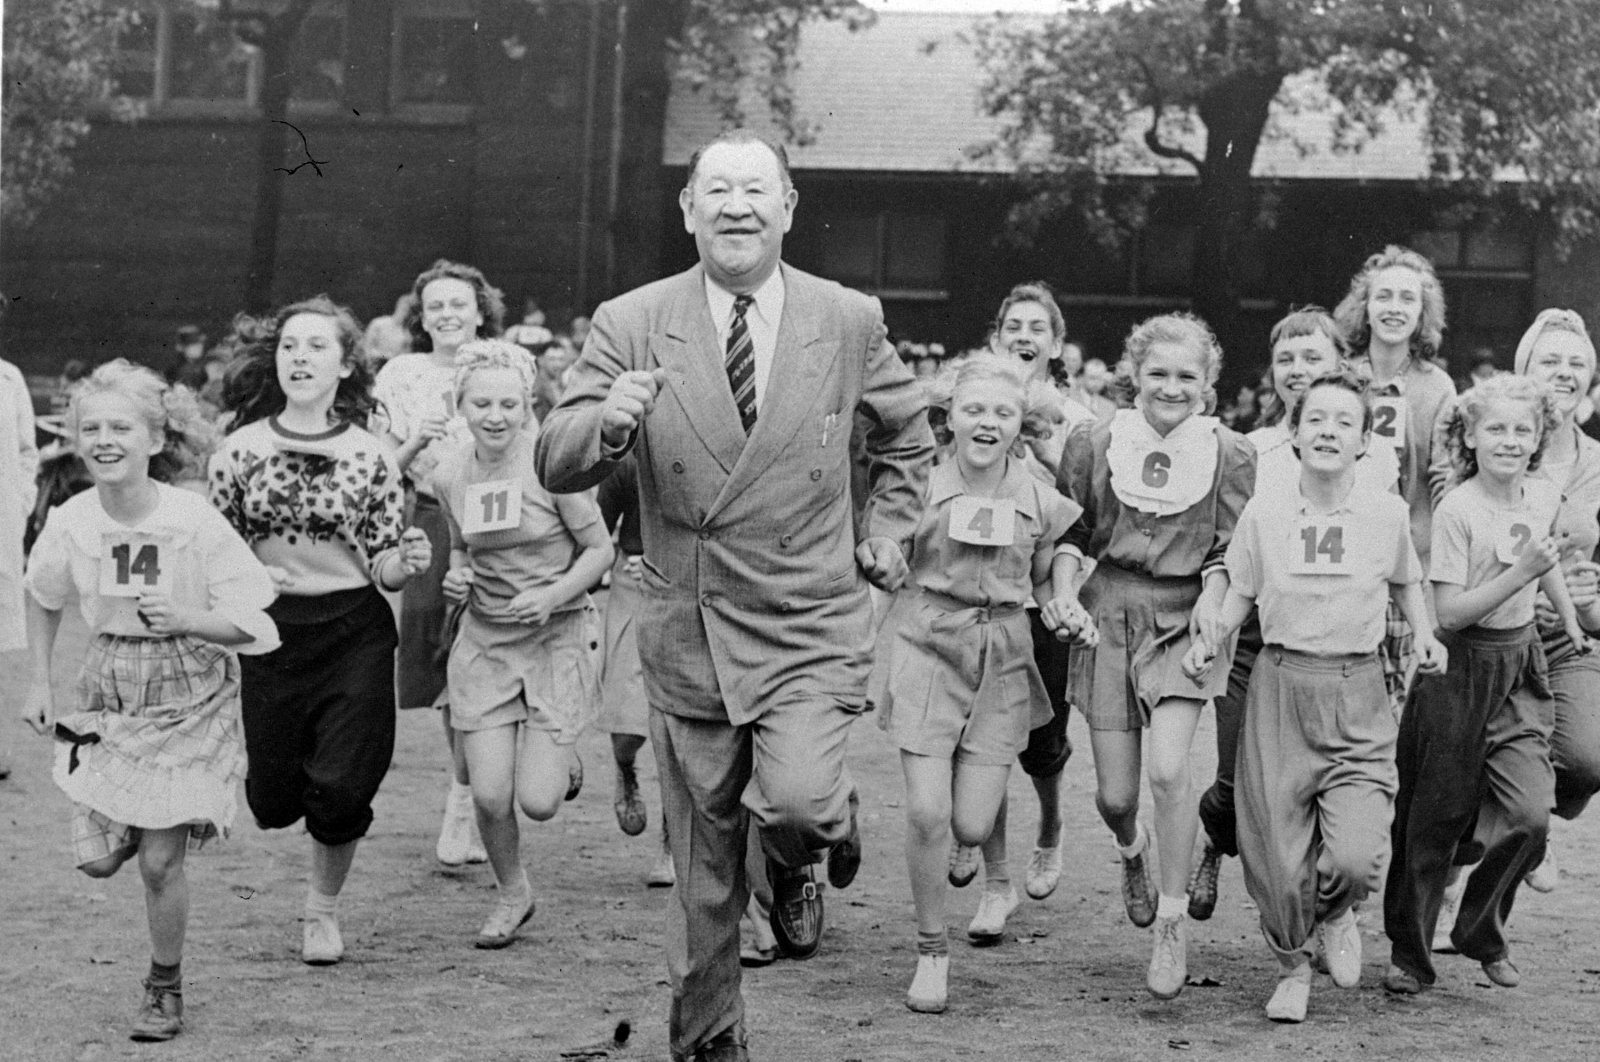 Jim Thorpe (C) sets a fast pace for some girls during a &quot;junior olympics&quot; event in Chicago, United States, June 6, 1948. (AP PHOTO)